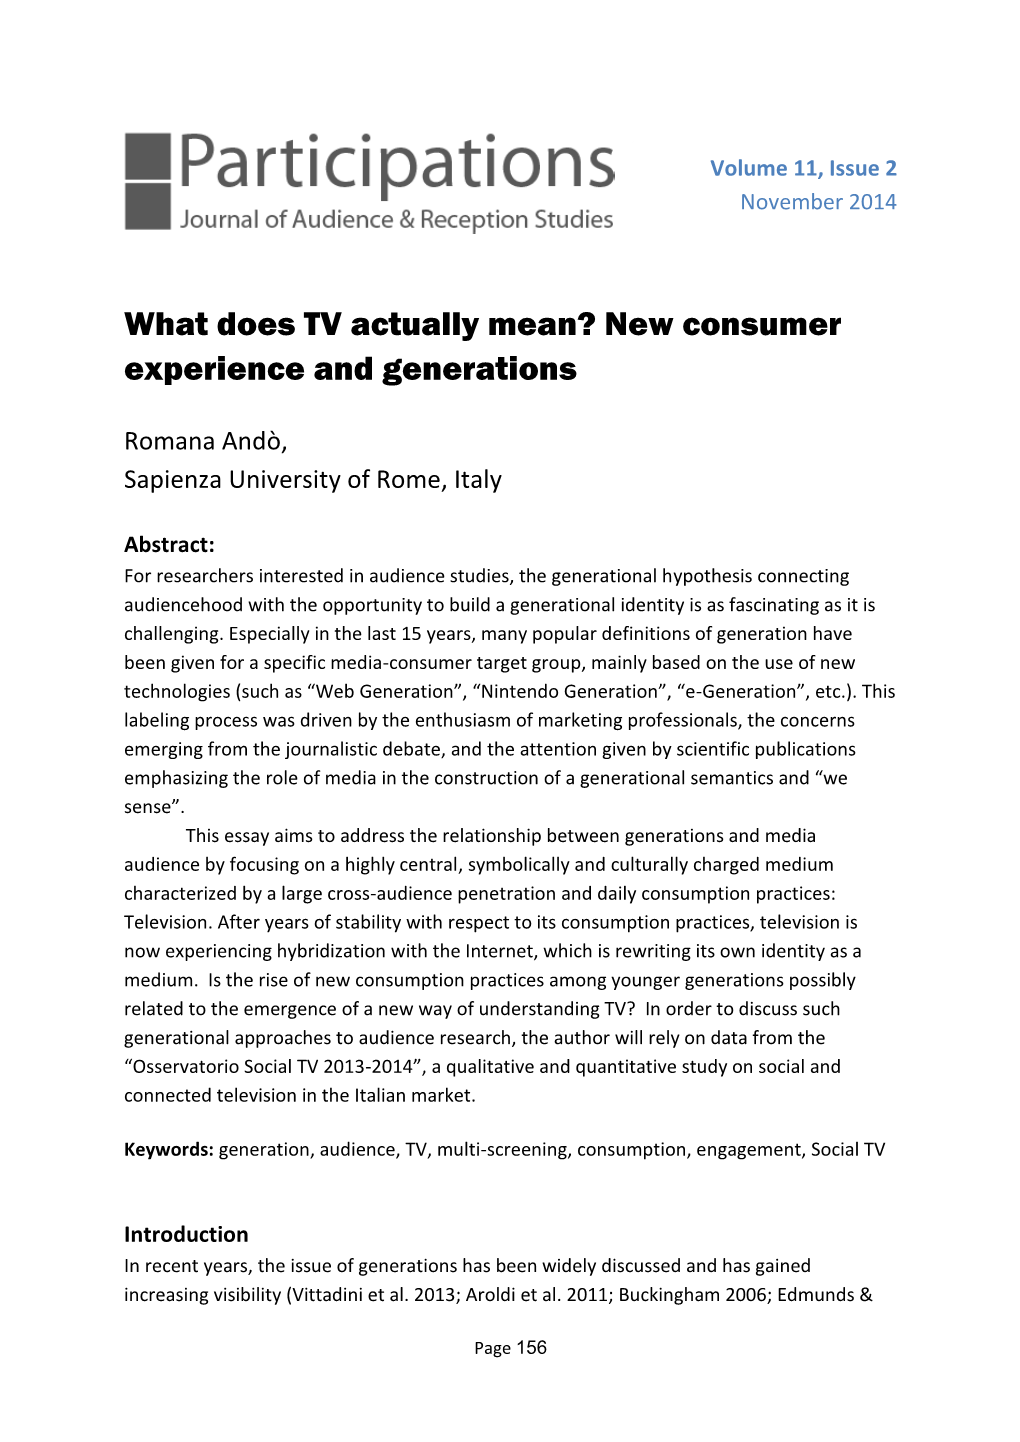 What Does TV Actually Mean? New Consumer Experience and Generations